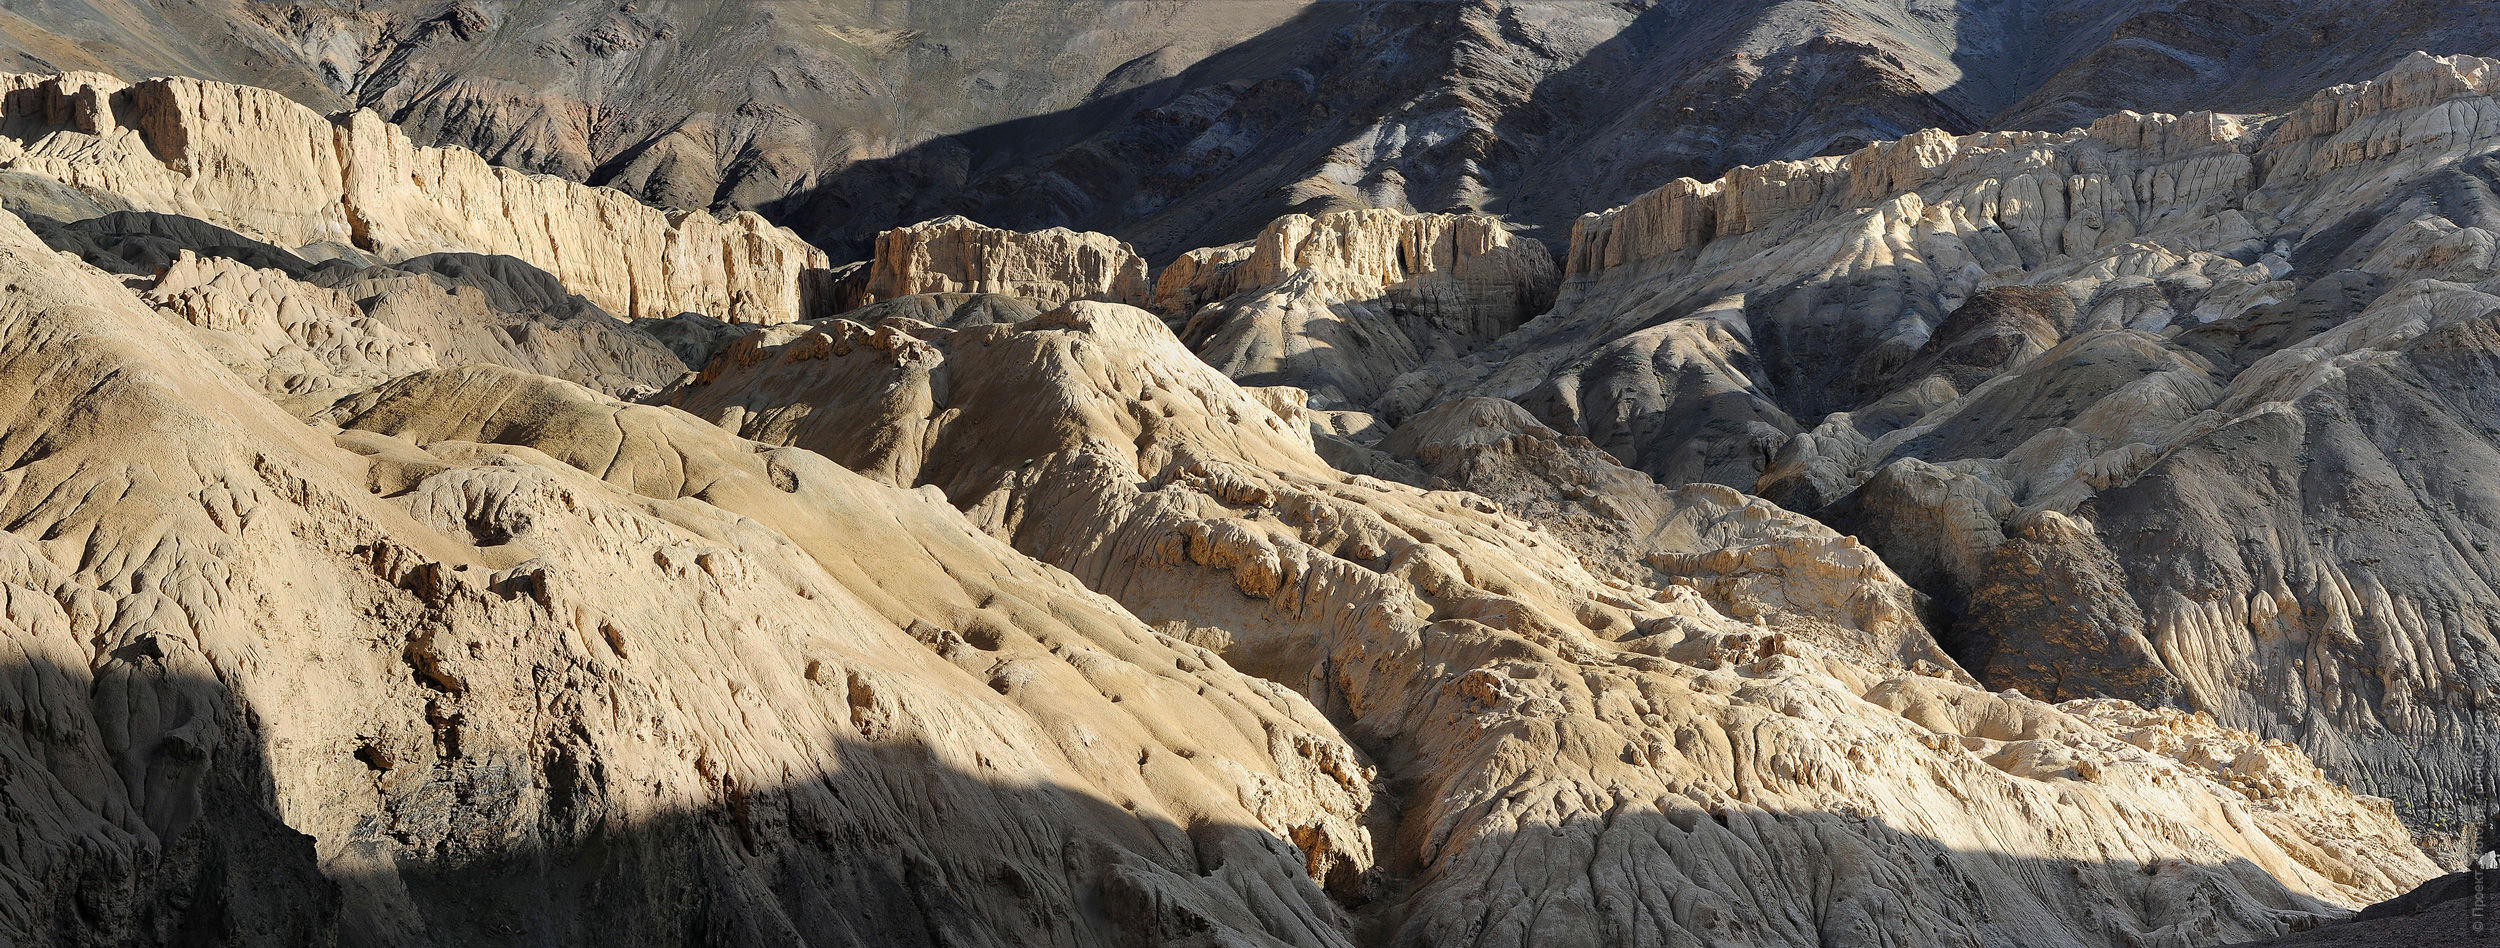 Moon Land. Photo tour to Tibet for the Winter Mysteries in Ladakh, Stok and Matho monasteries, 01.03. - 03/10/2020